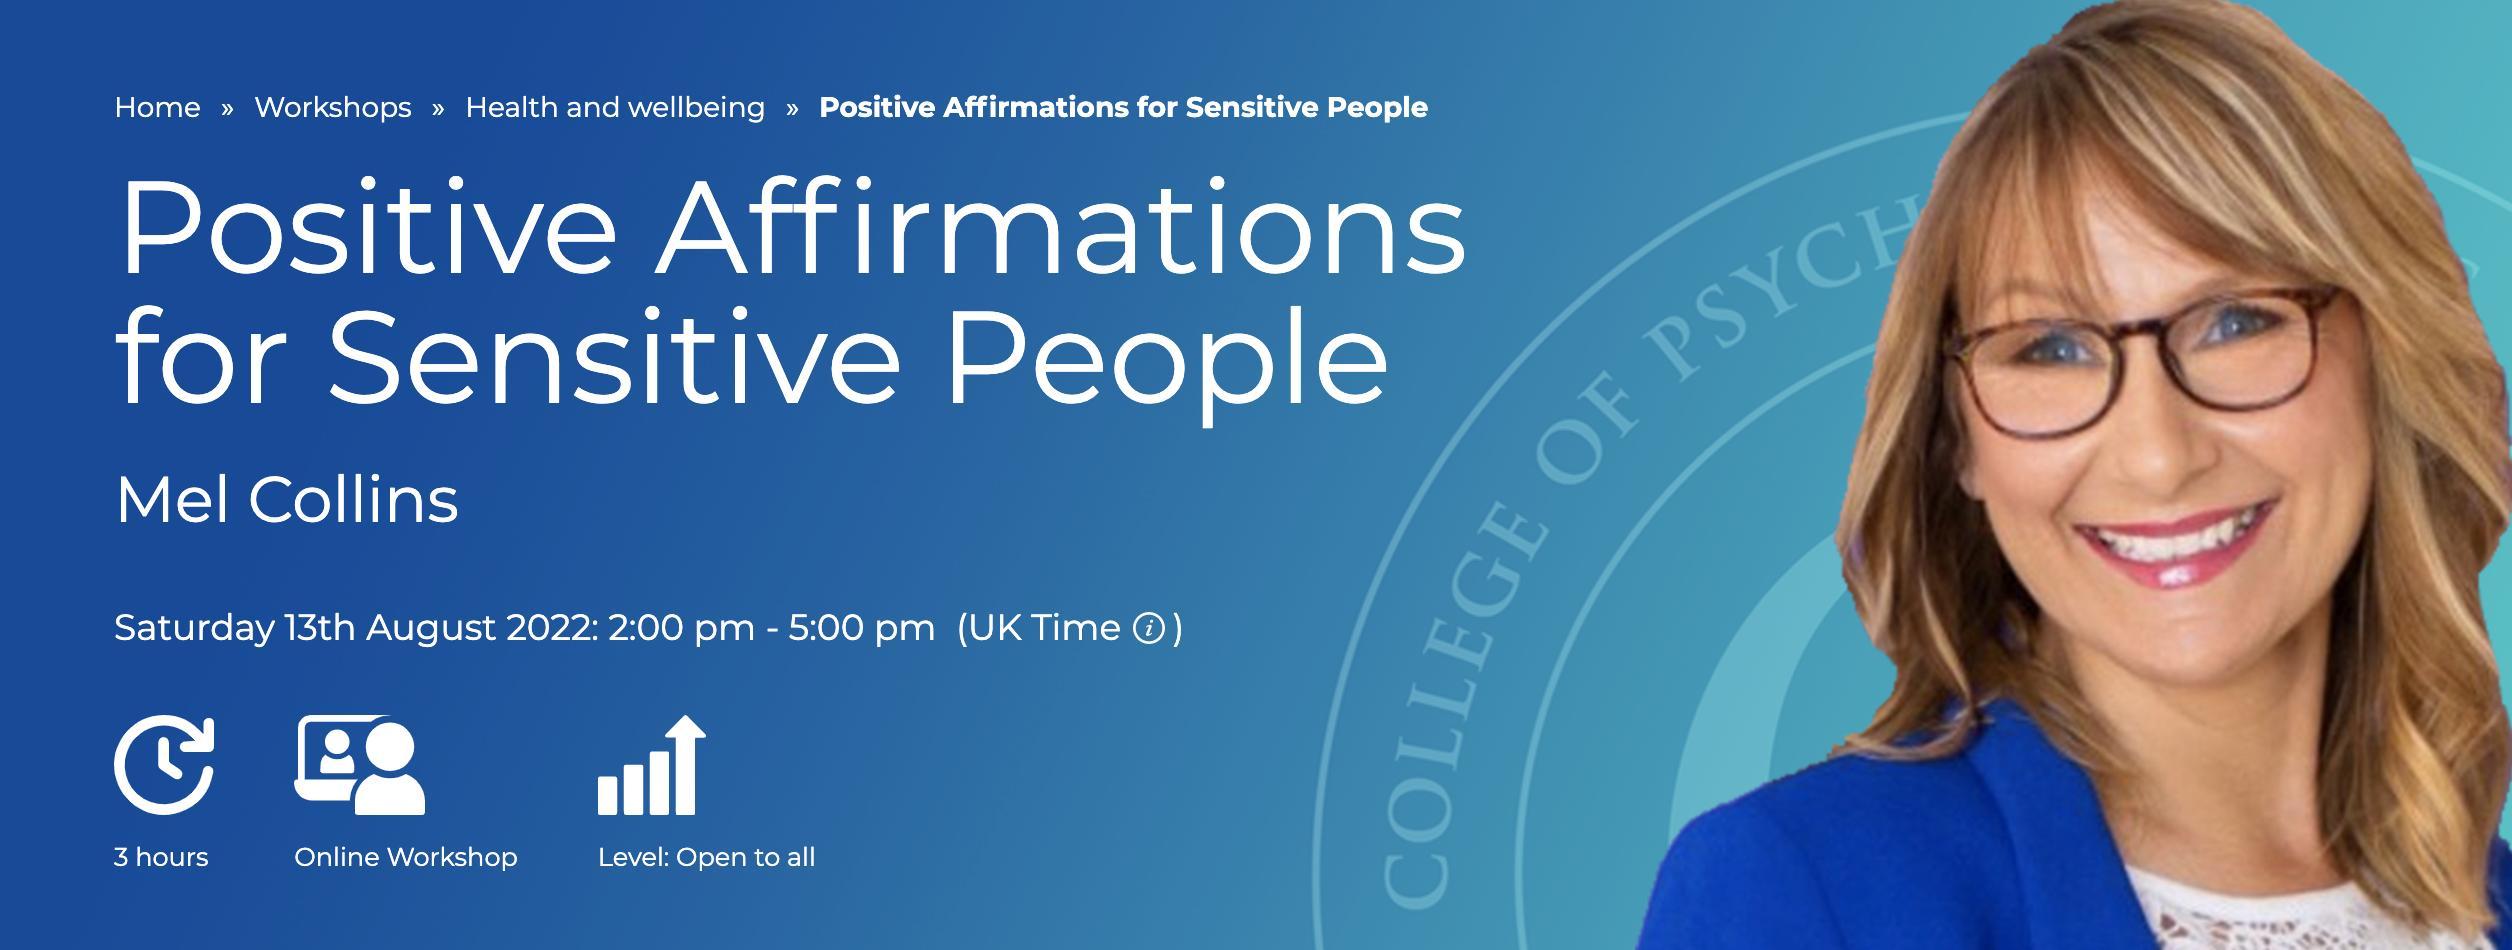 Positive Affirmations for Sensitive People with Mel Collins